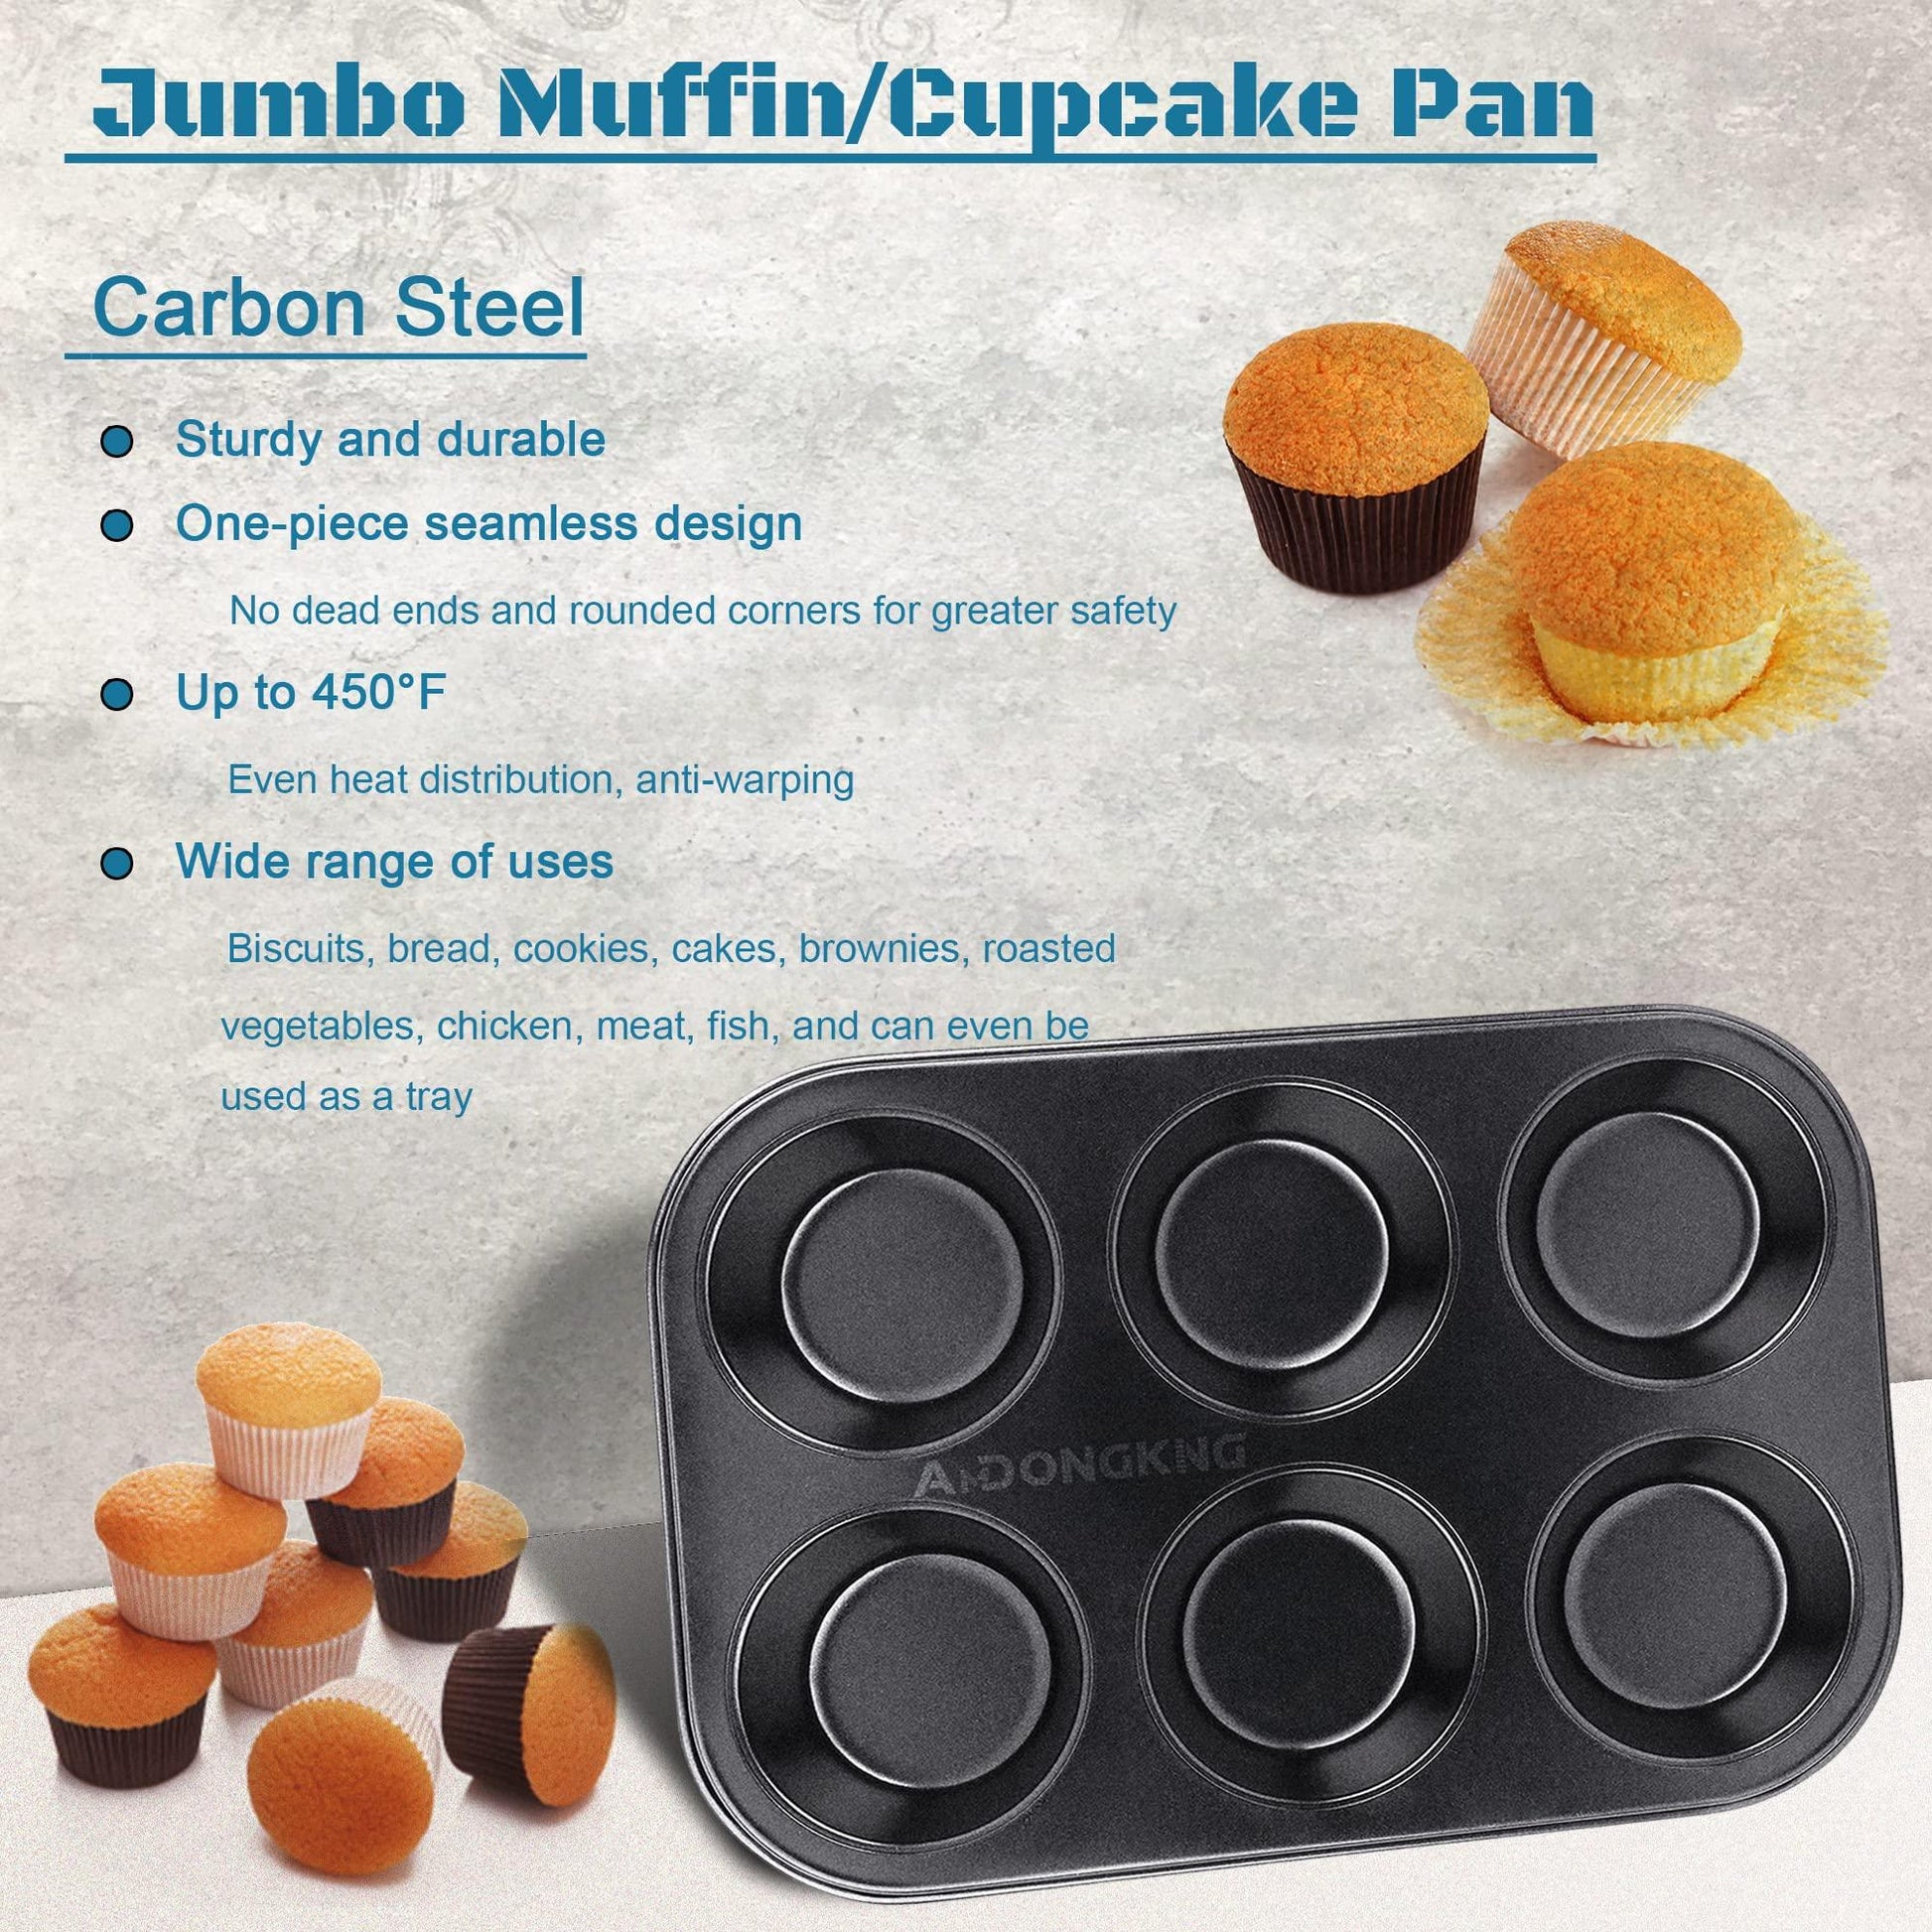 AmDONGKING Muffin Pan, Cupcake Pans, 6 Cup Premium Non-Stick Carbon Steel Kitchen Baking Quiche Pan, 10.4 X 7.1 Inches - CookCave